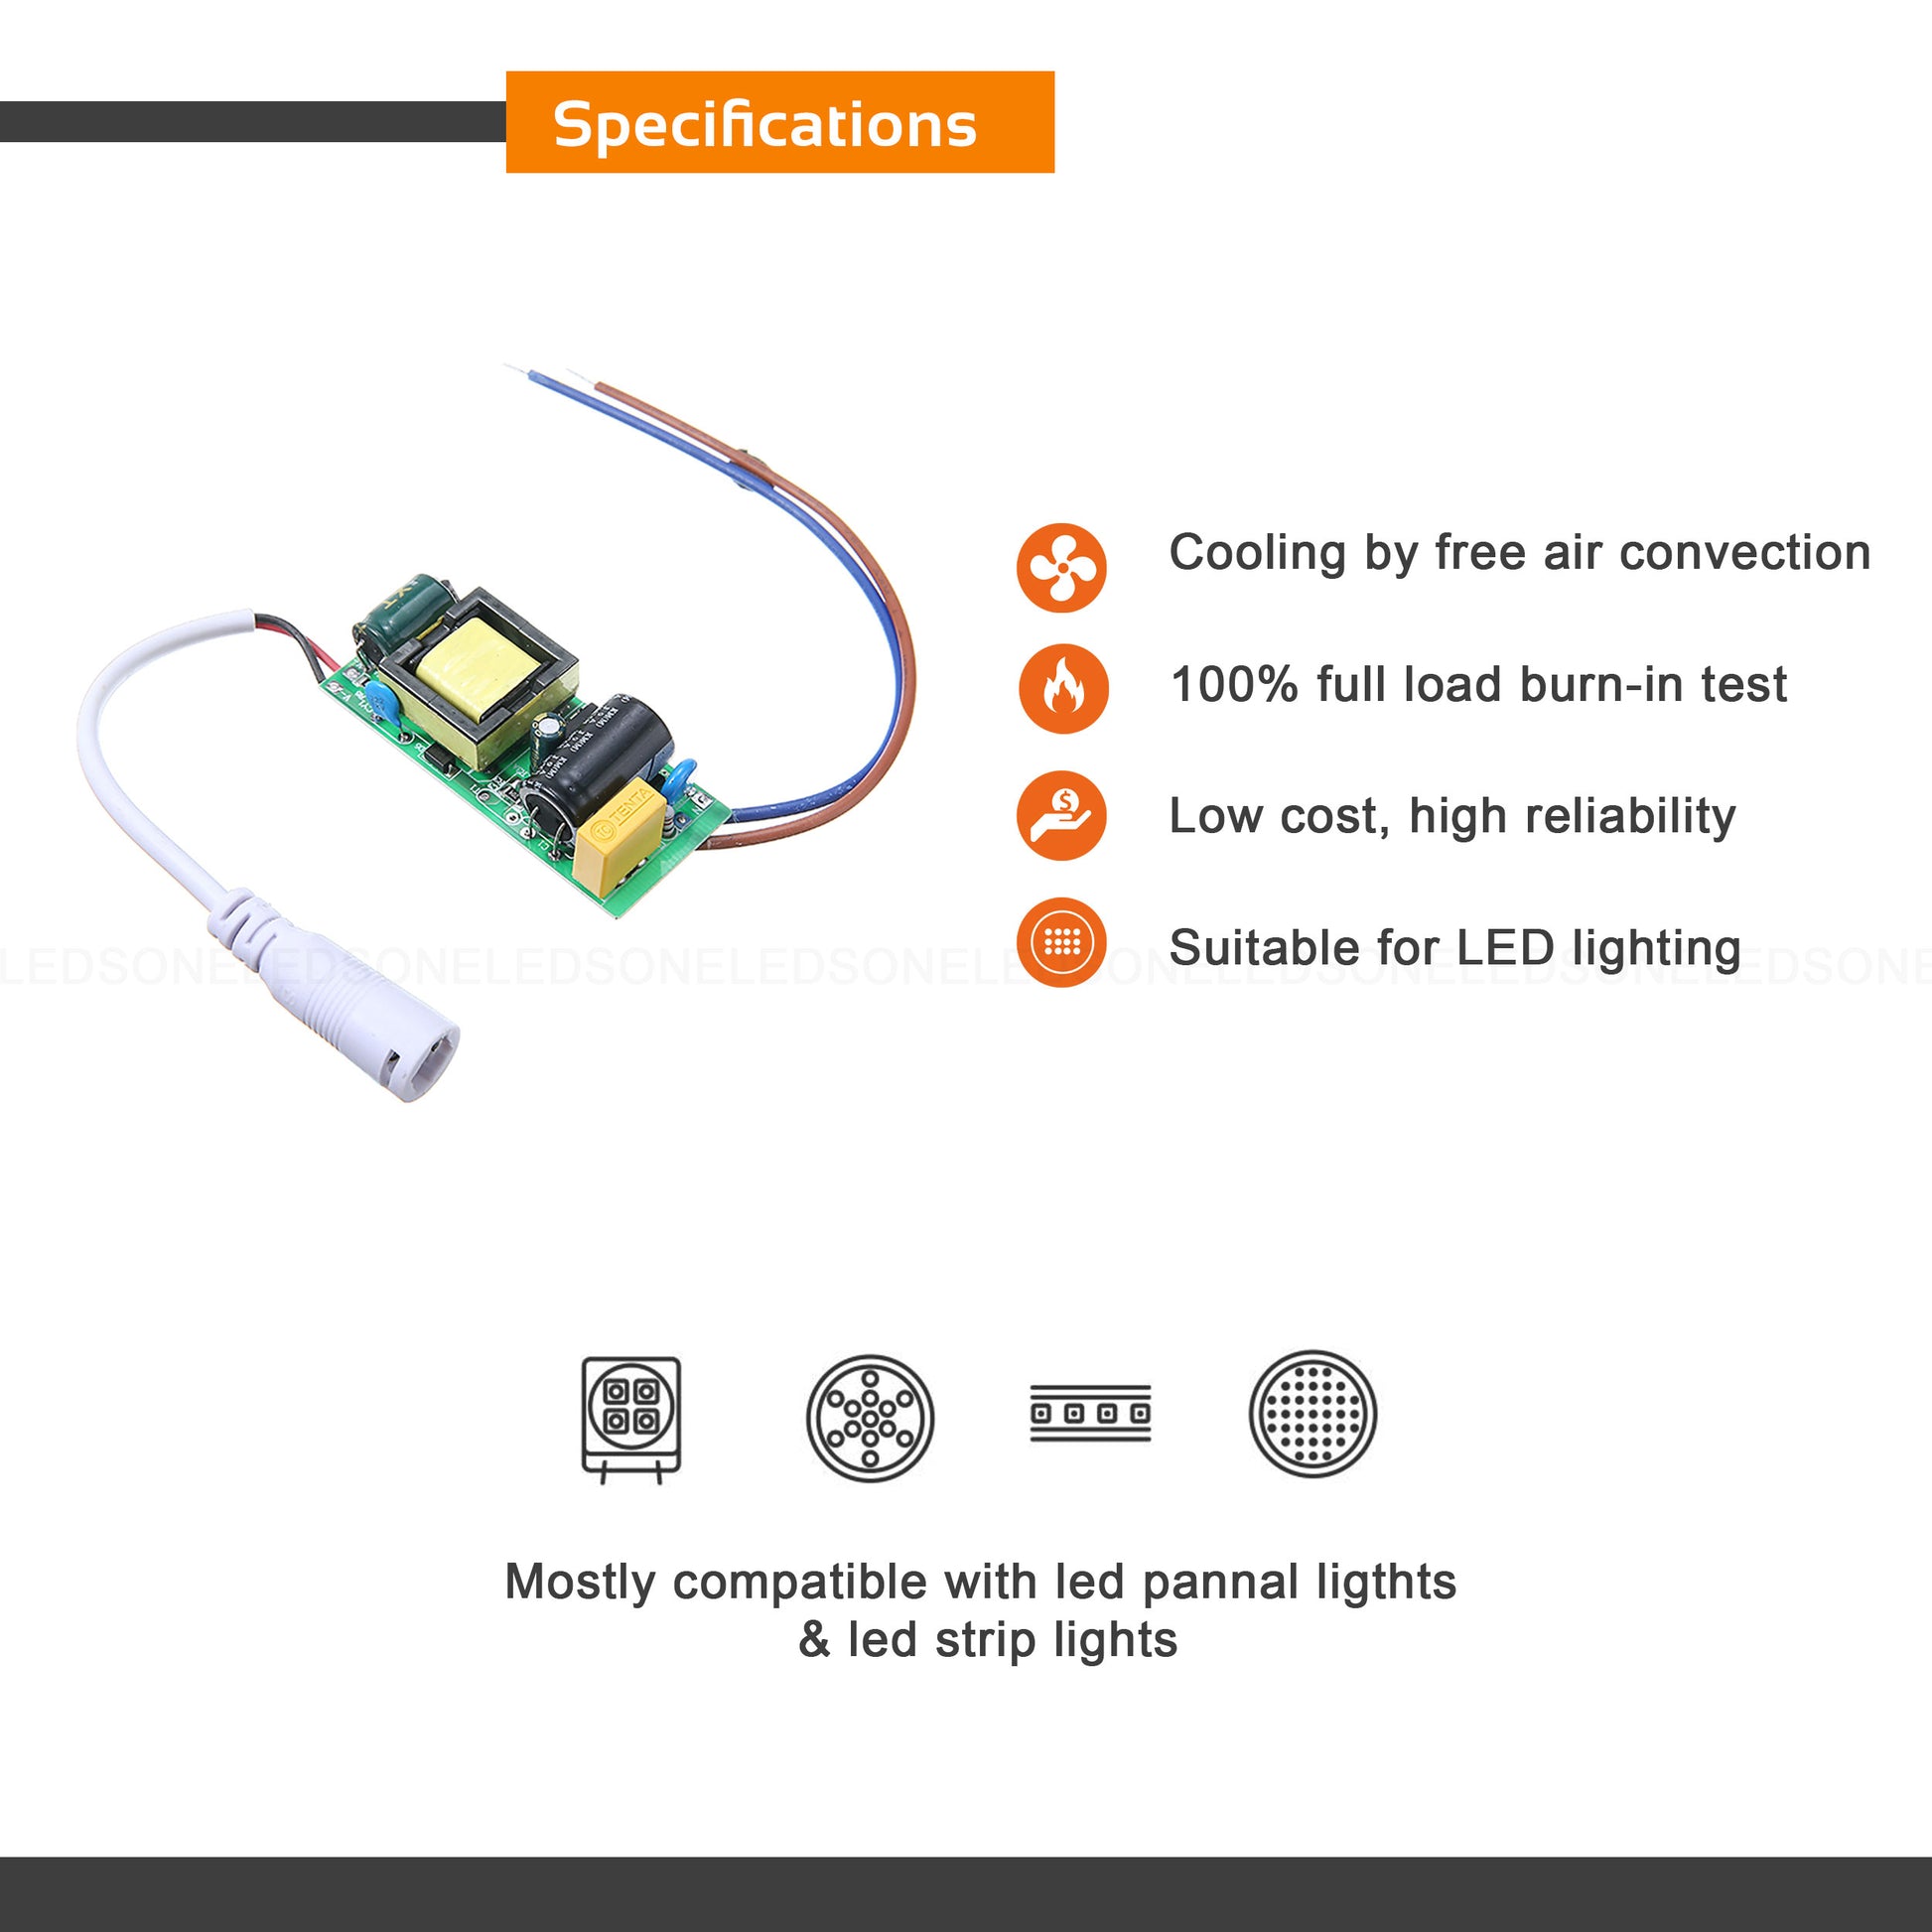 Specifications of 7w 300mAmp LED Driver